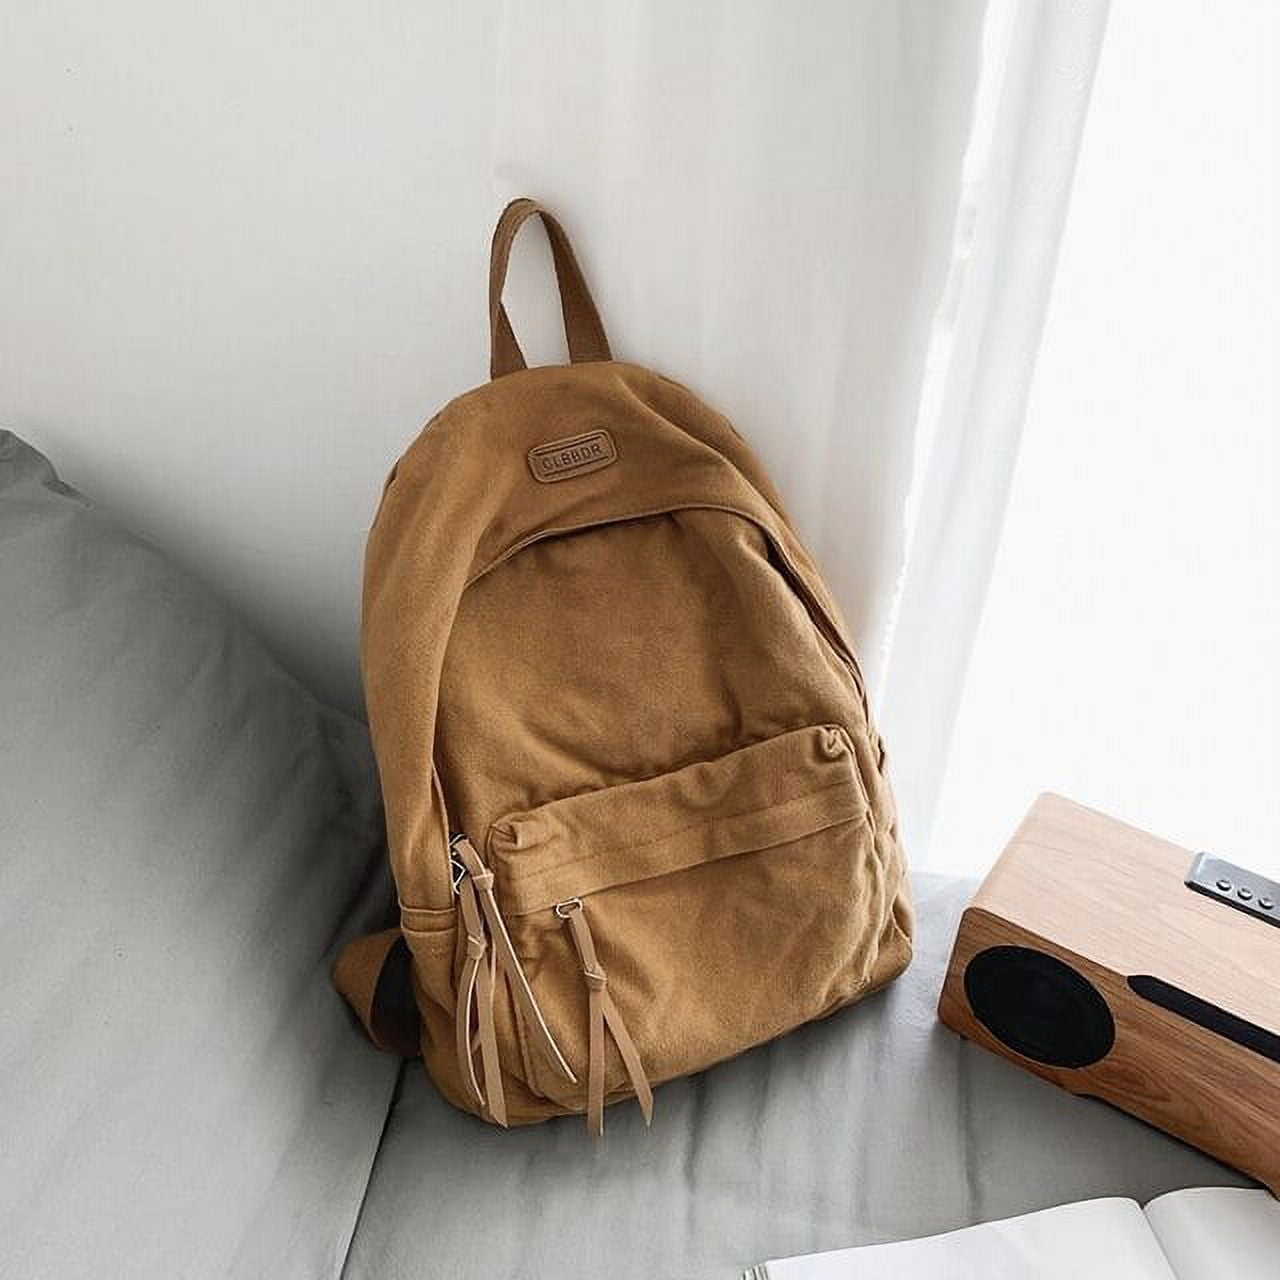 Green Canvas and Brown Leather Backpack For College